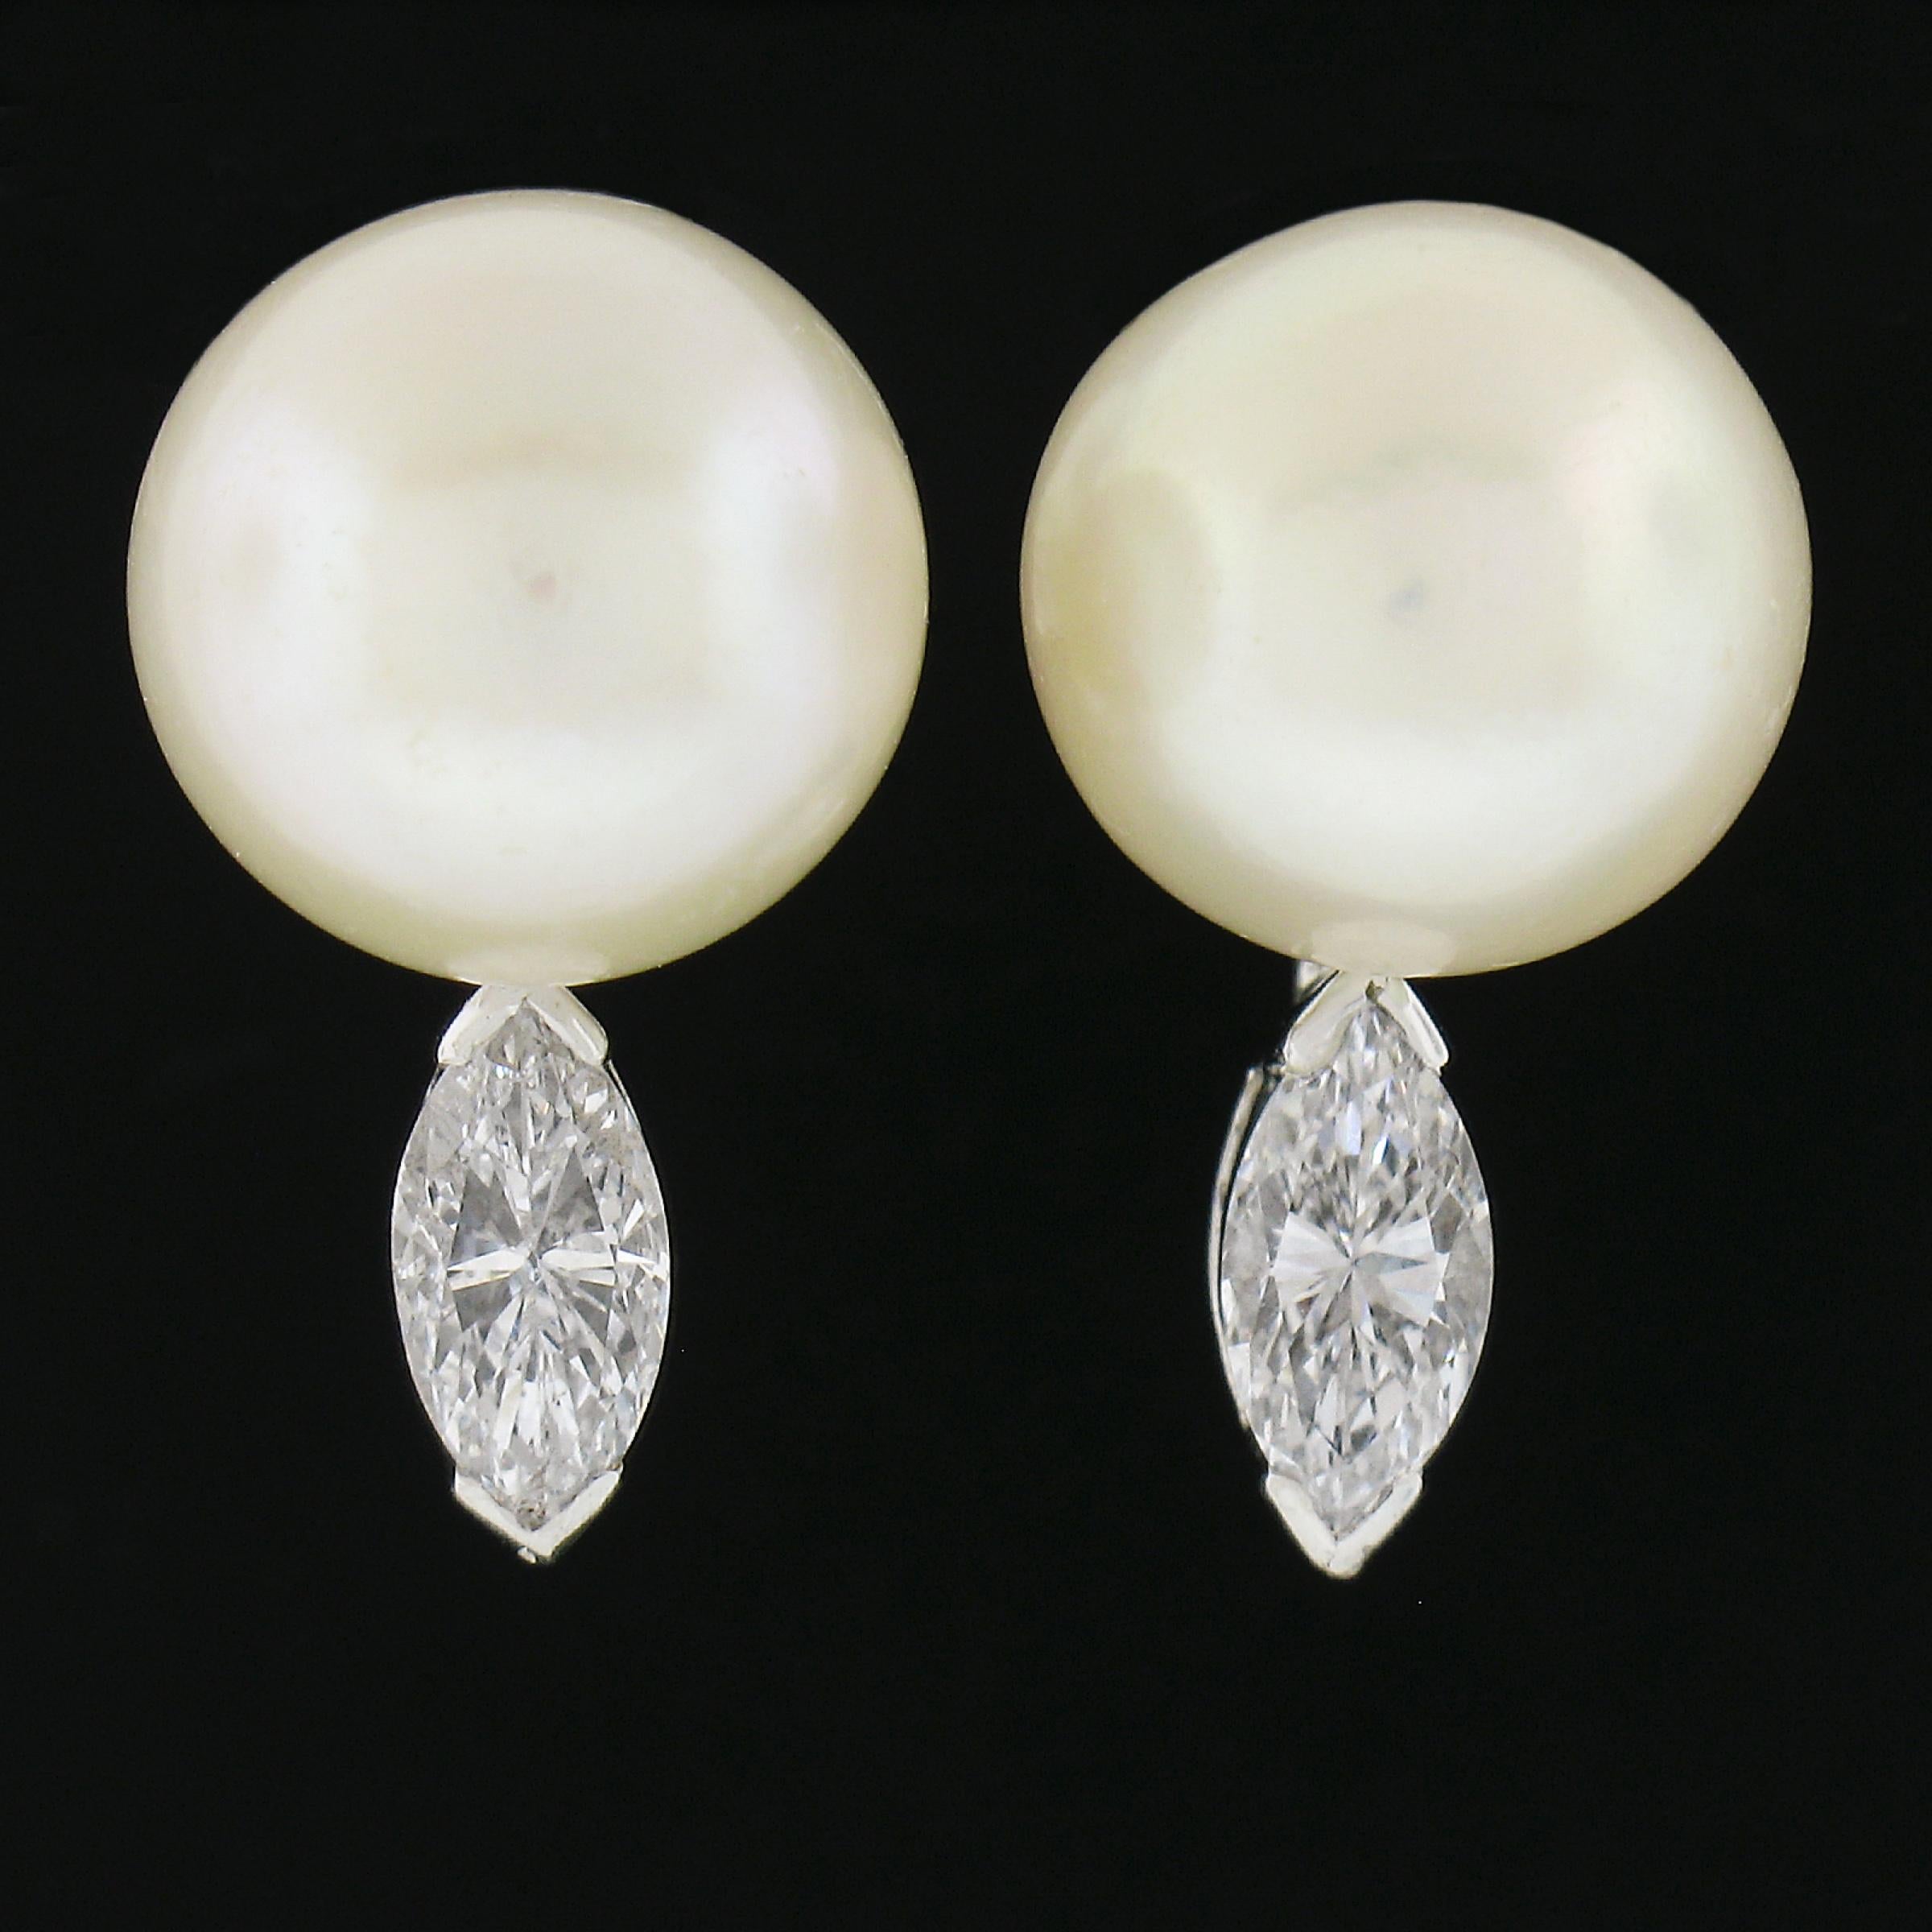 --Stone(s):--
(2) Genuine Cultured Pearls - Round Shape - Nice White Color - Good Luster - 10mm+ each (approx.)
(2) Natural Genuine Diamonds - Marquise Cut - V Prong Set - G/H Color - VS2-SI2 Clarity - 0.65ctw (approx.)
Total Carat Weight:	0.65